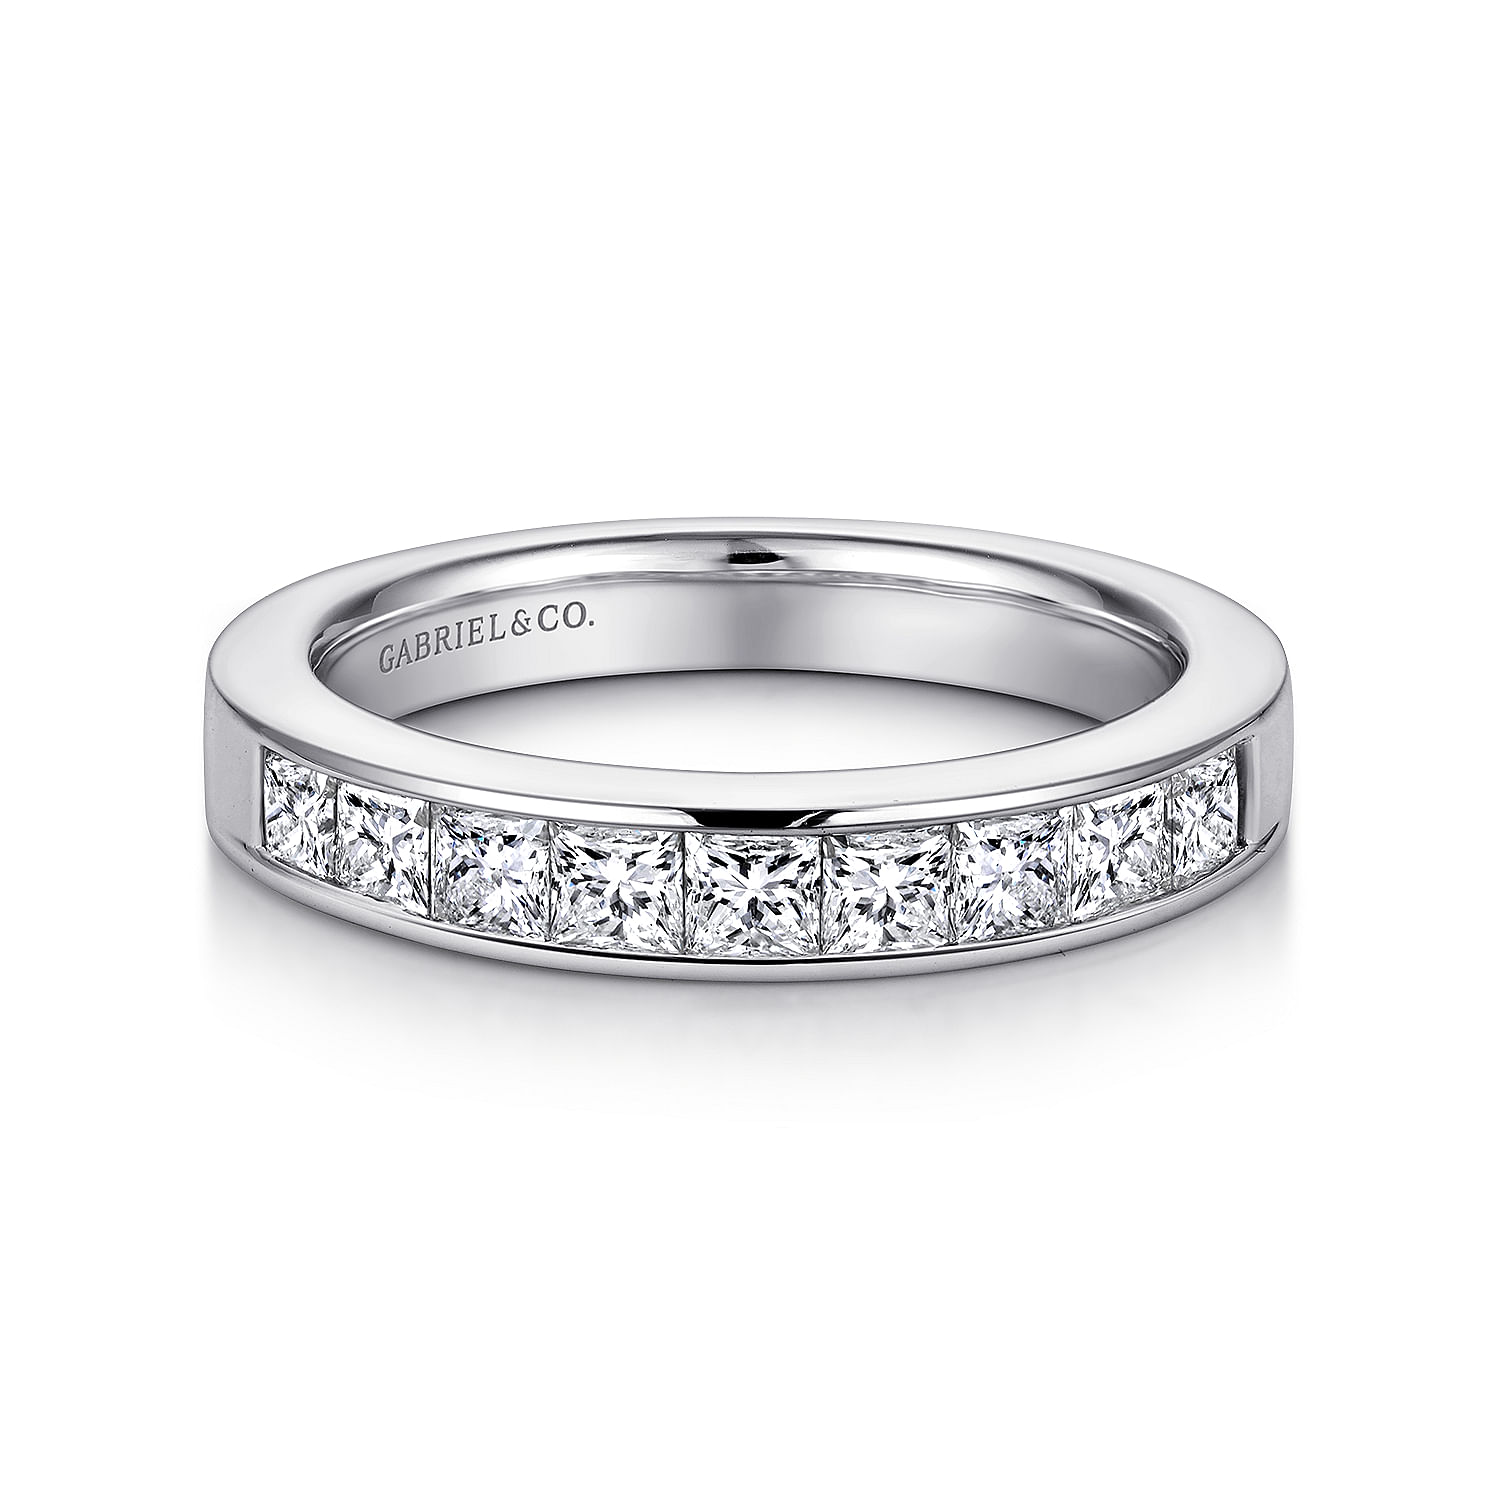 Engagement Rings - Diamond, Halo, Solitaire & More